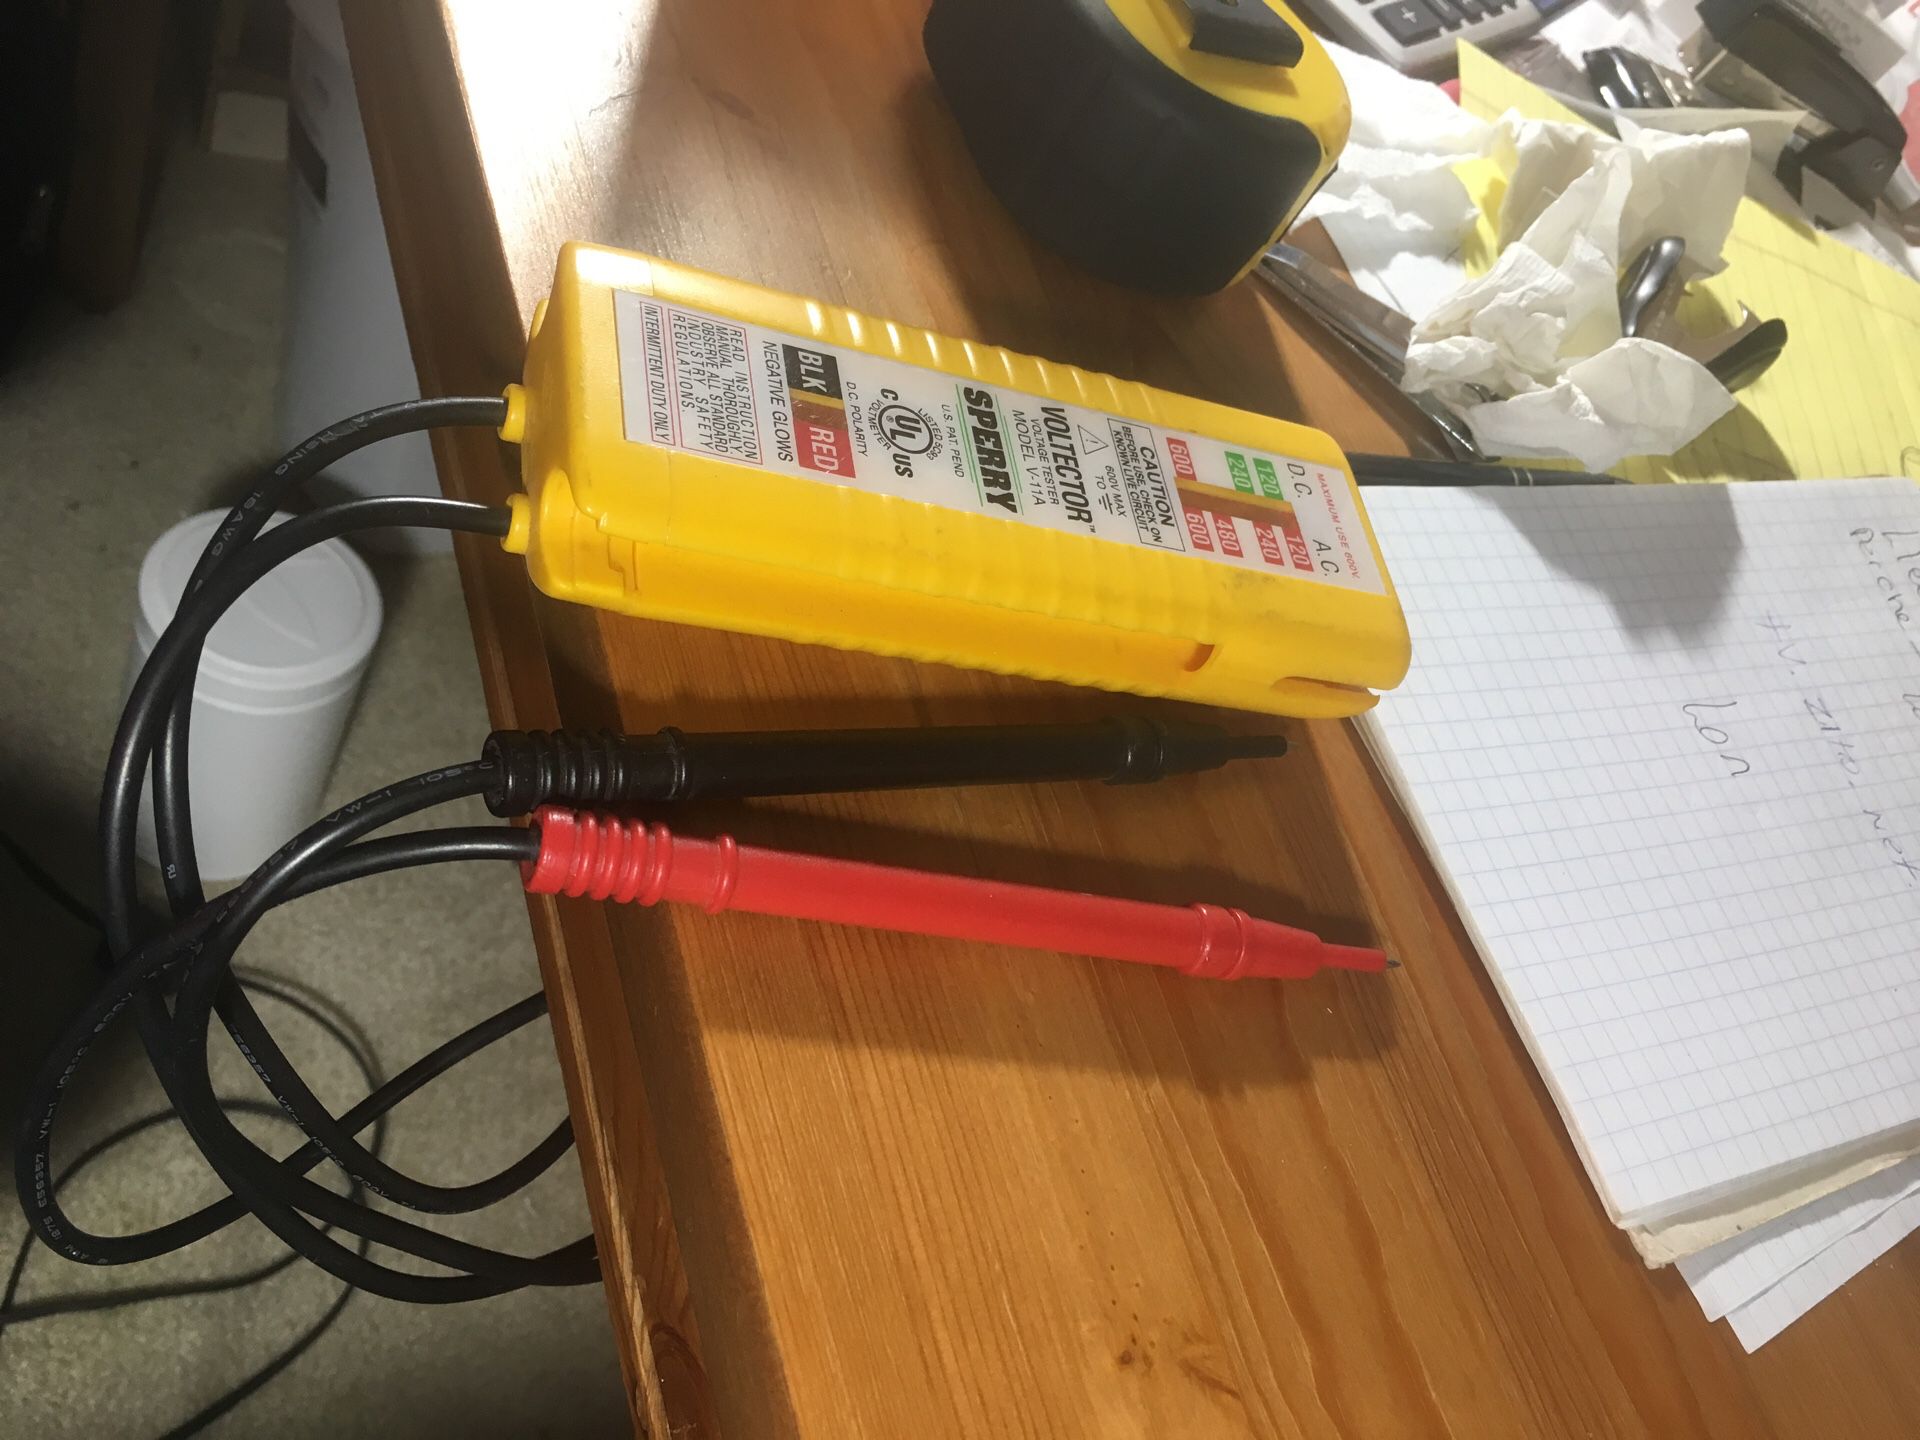 Heavy duty tester for electrical like new